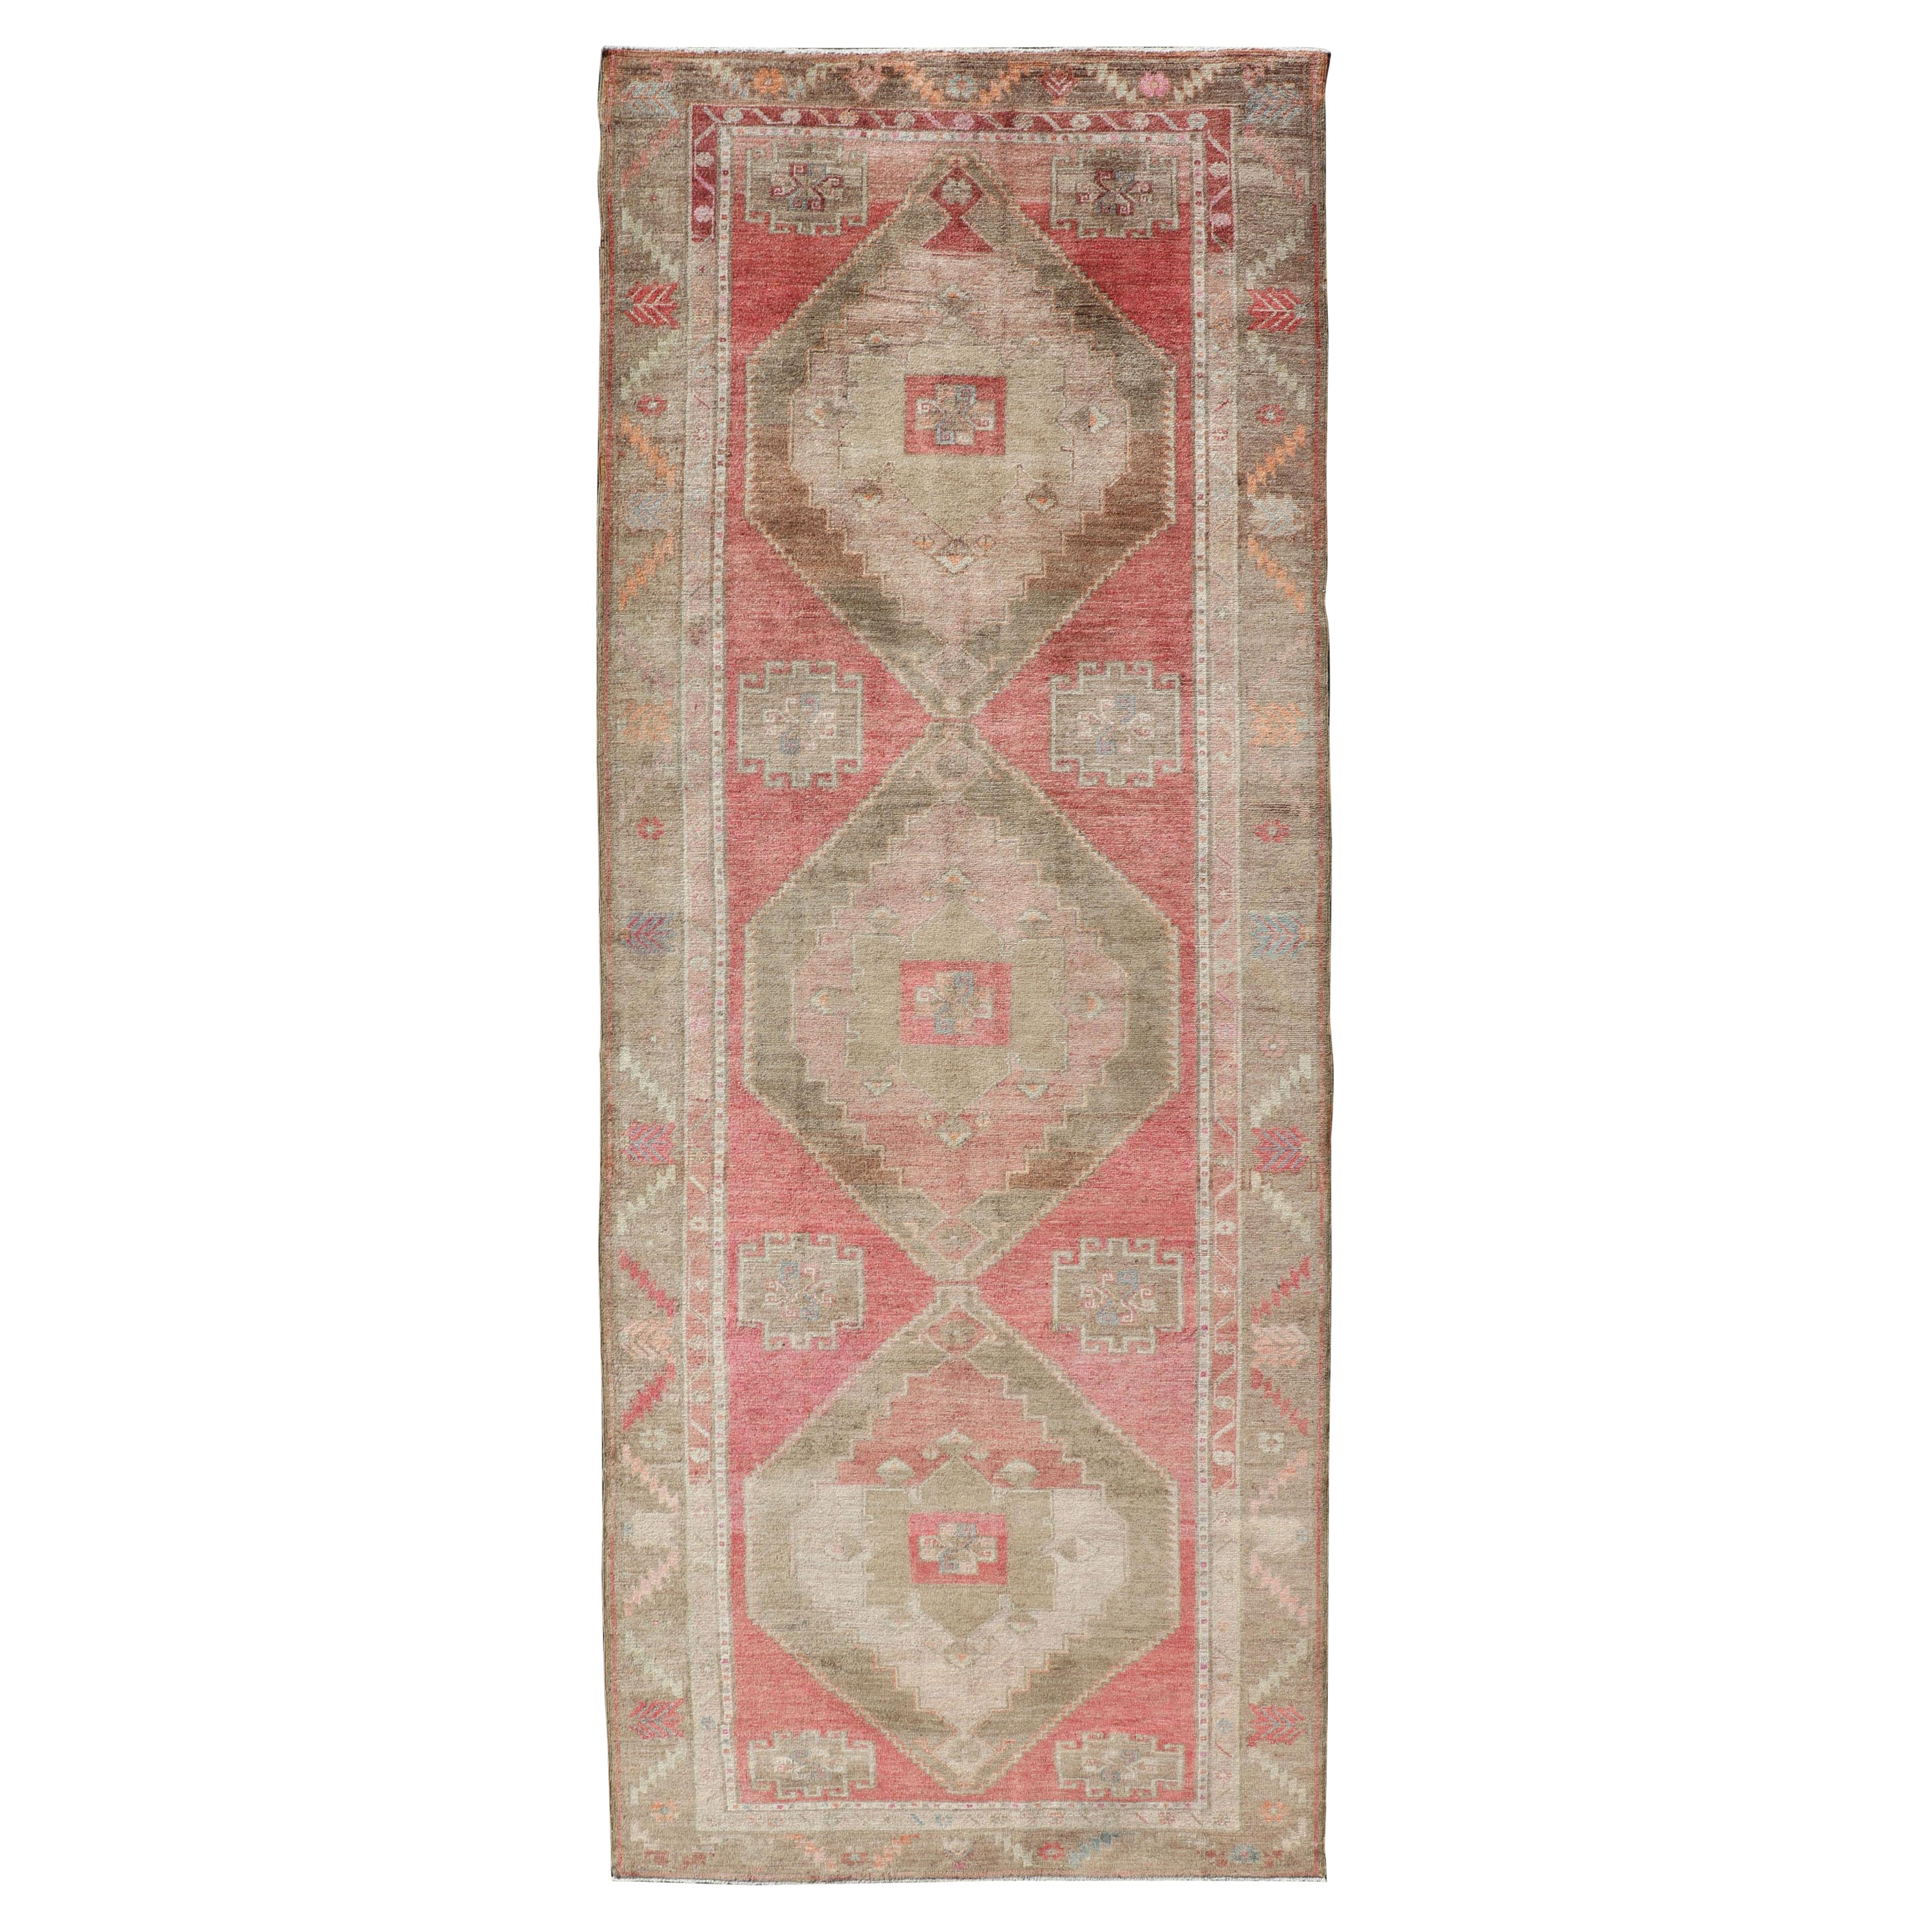 Long Gallery Turkish Vintage Runner with Medallion Design in Green, Pink 